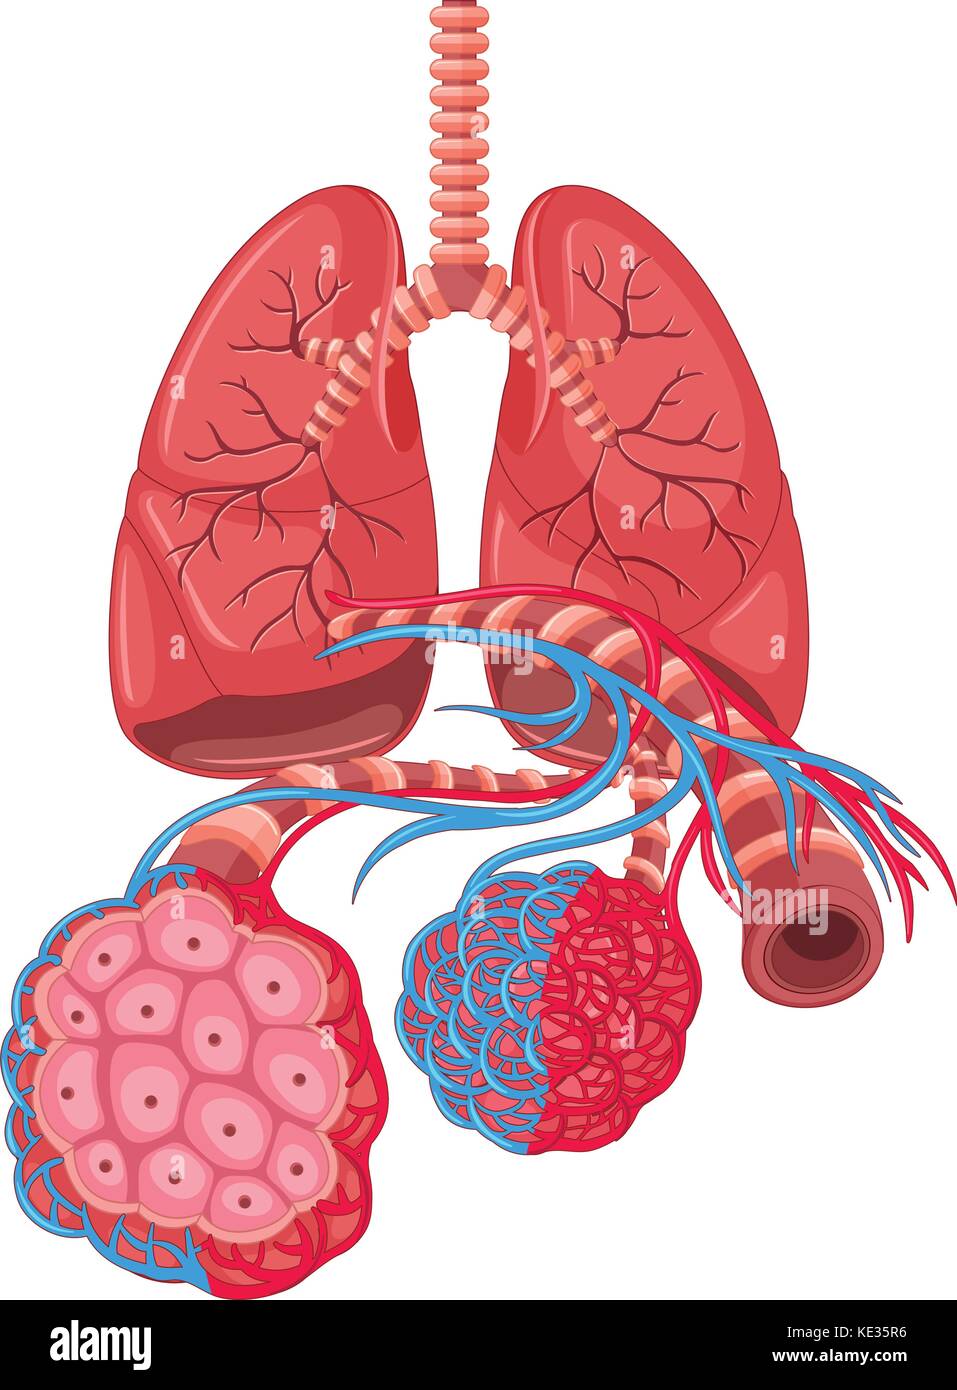 Diagram showing lung cancer illustration Stock Vector